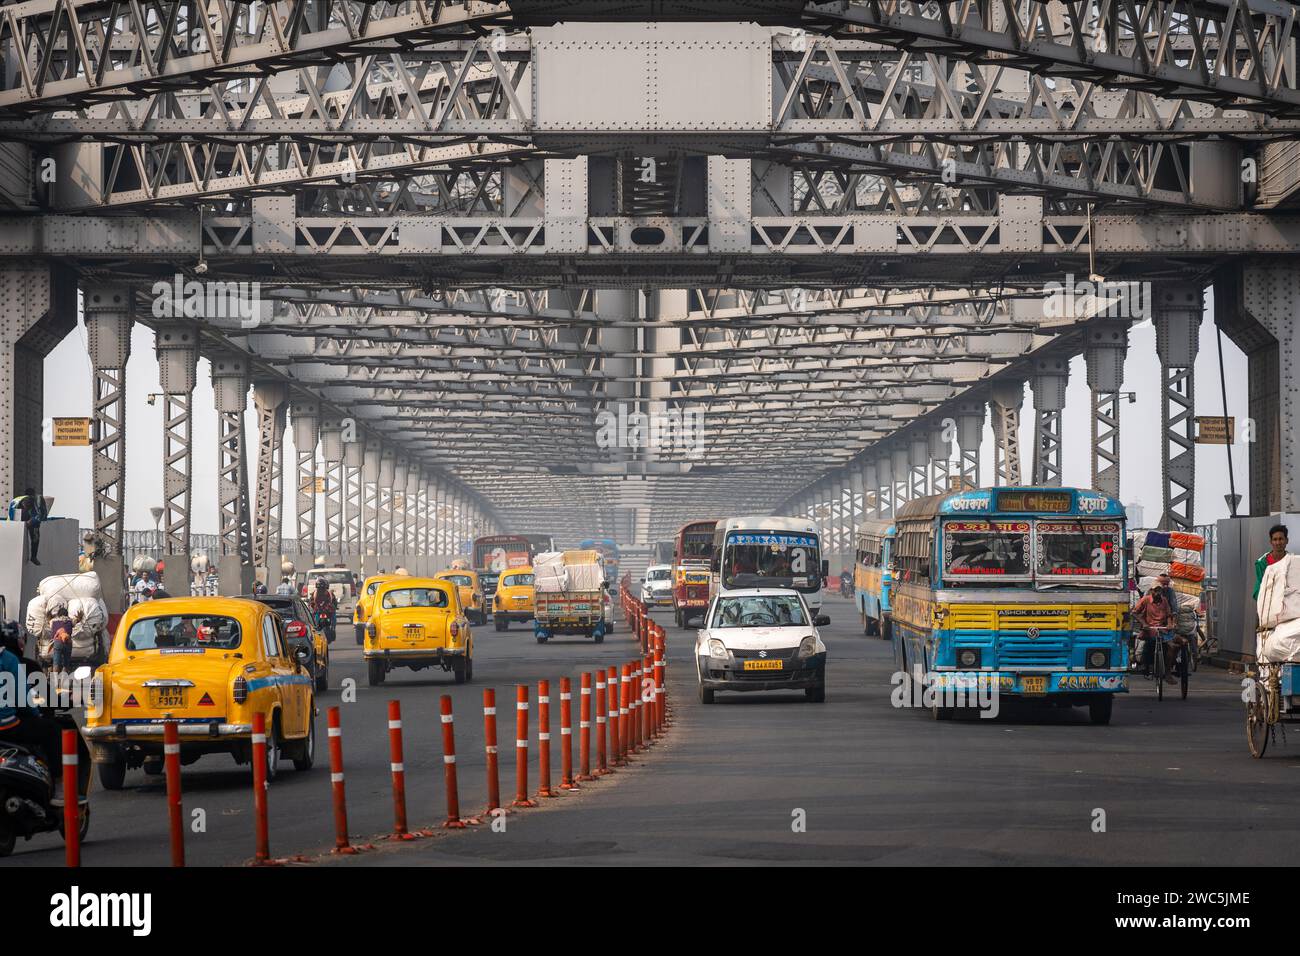 Traffic on the iconic Howrah Bridge, the busiest cantilever bridge in the world, in Kolkata, West Bengal, India. Stock Photo